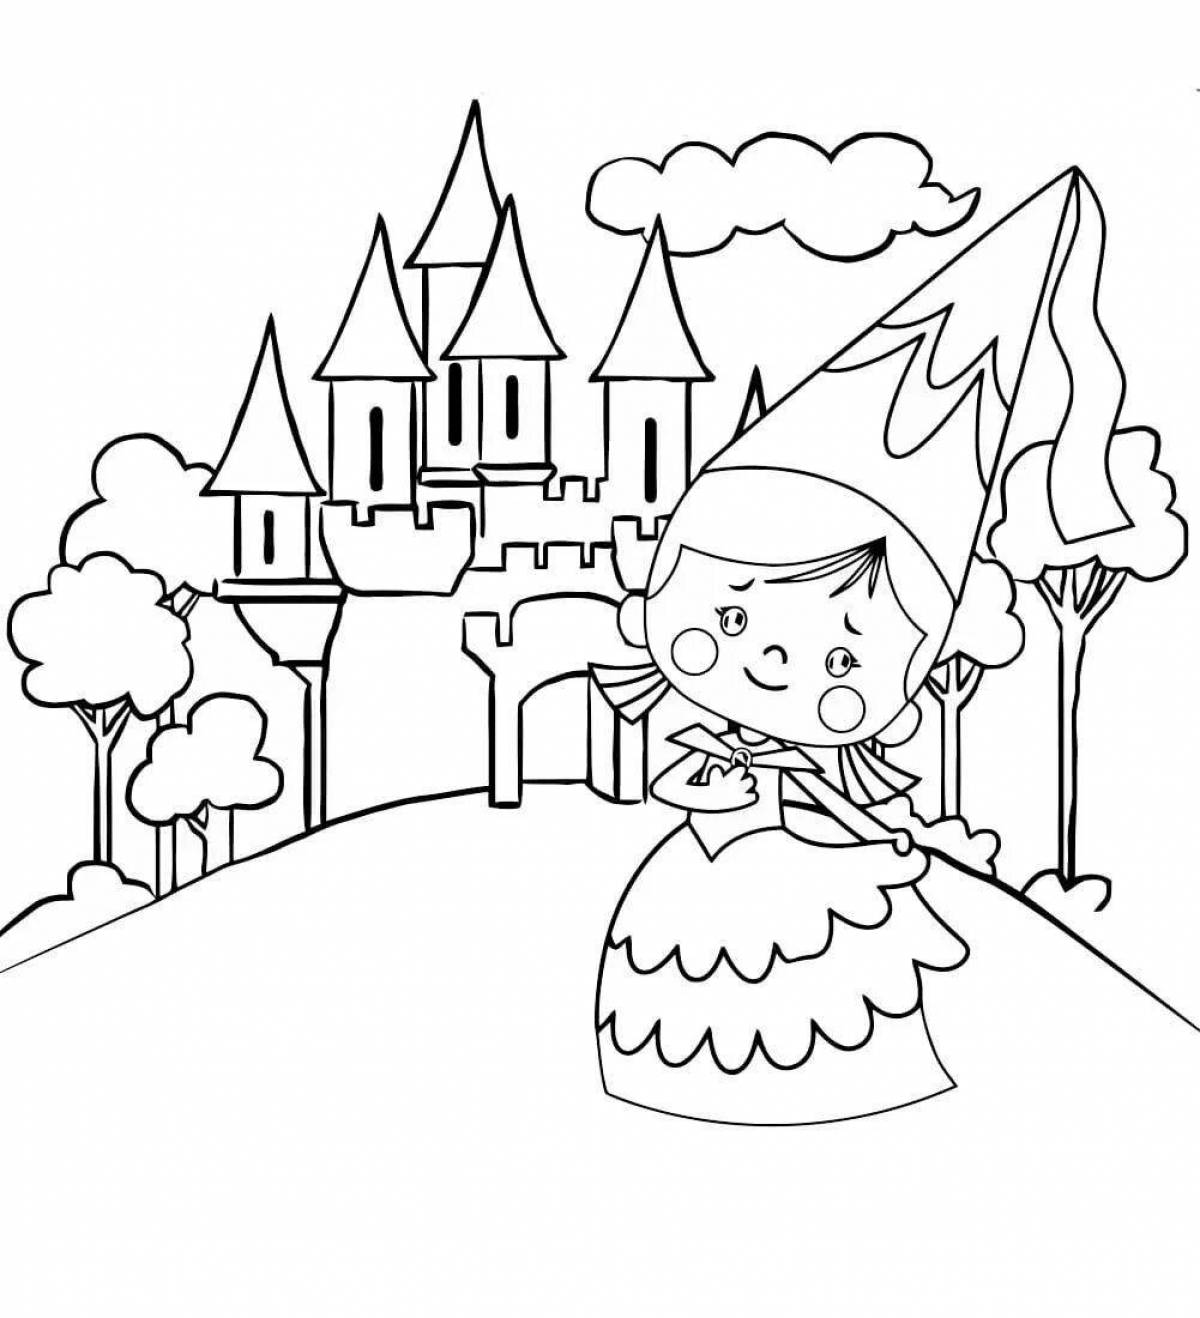 Shining princess castle coloring book for kids